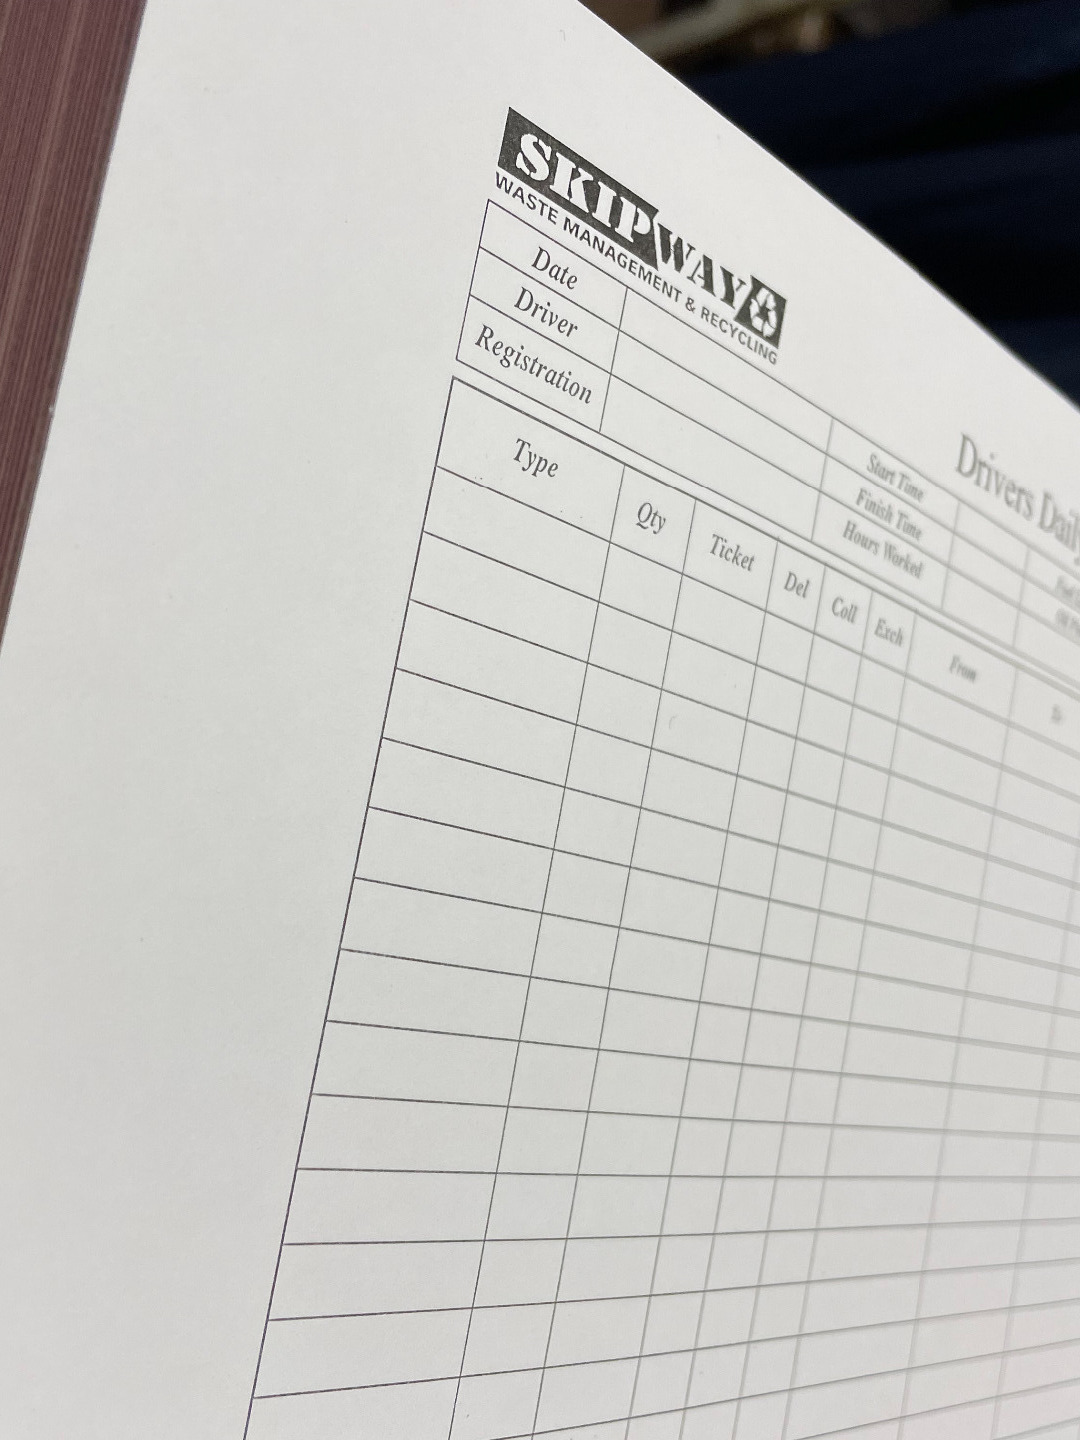 Drivers Daily Report Sheets printed by Gillprint Ltd, Dungannon, Northern Ireland